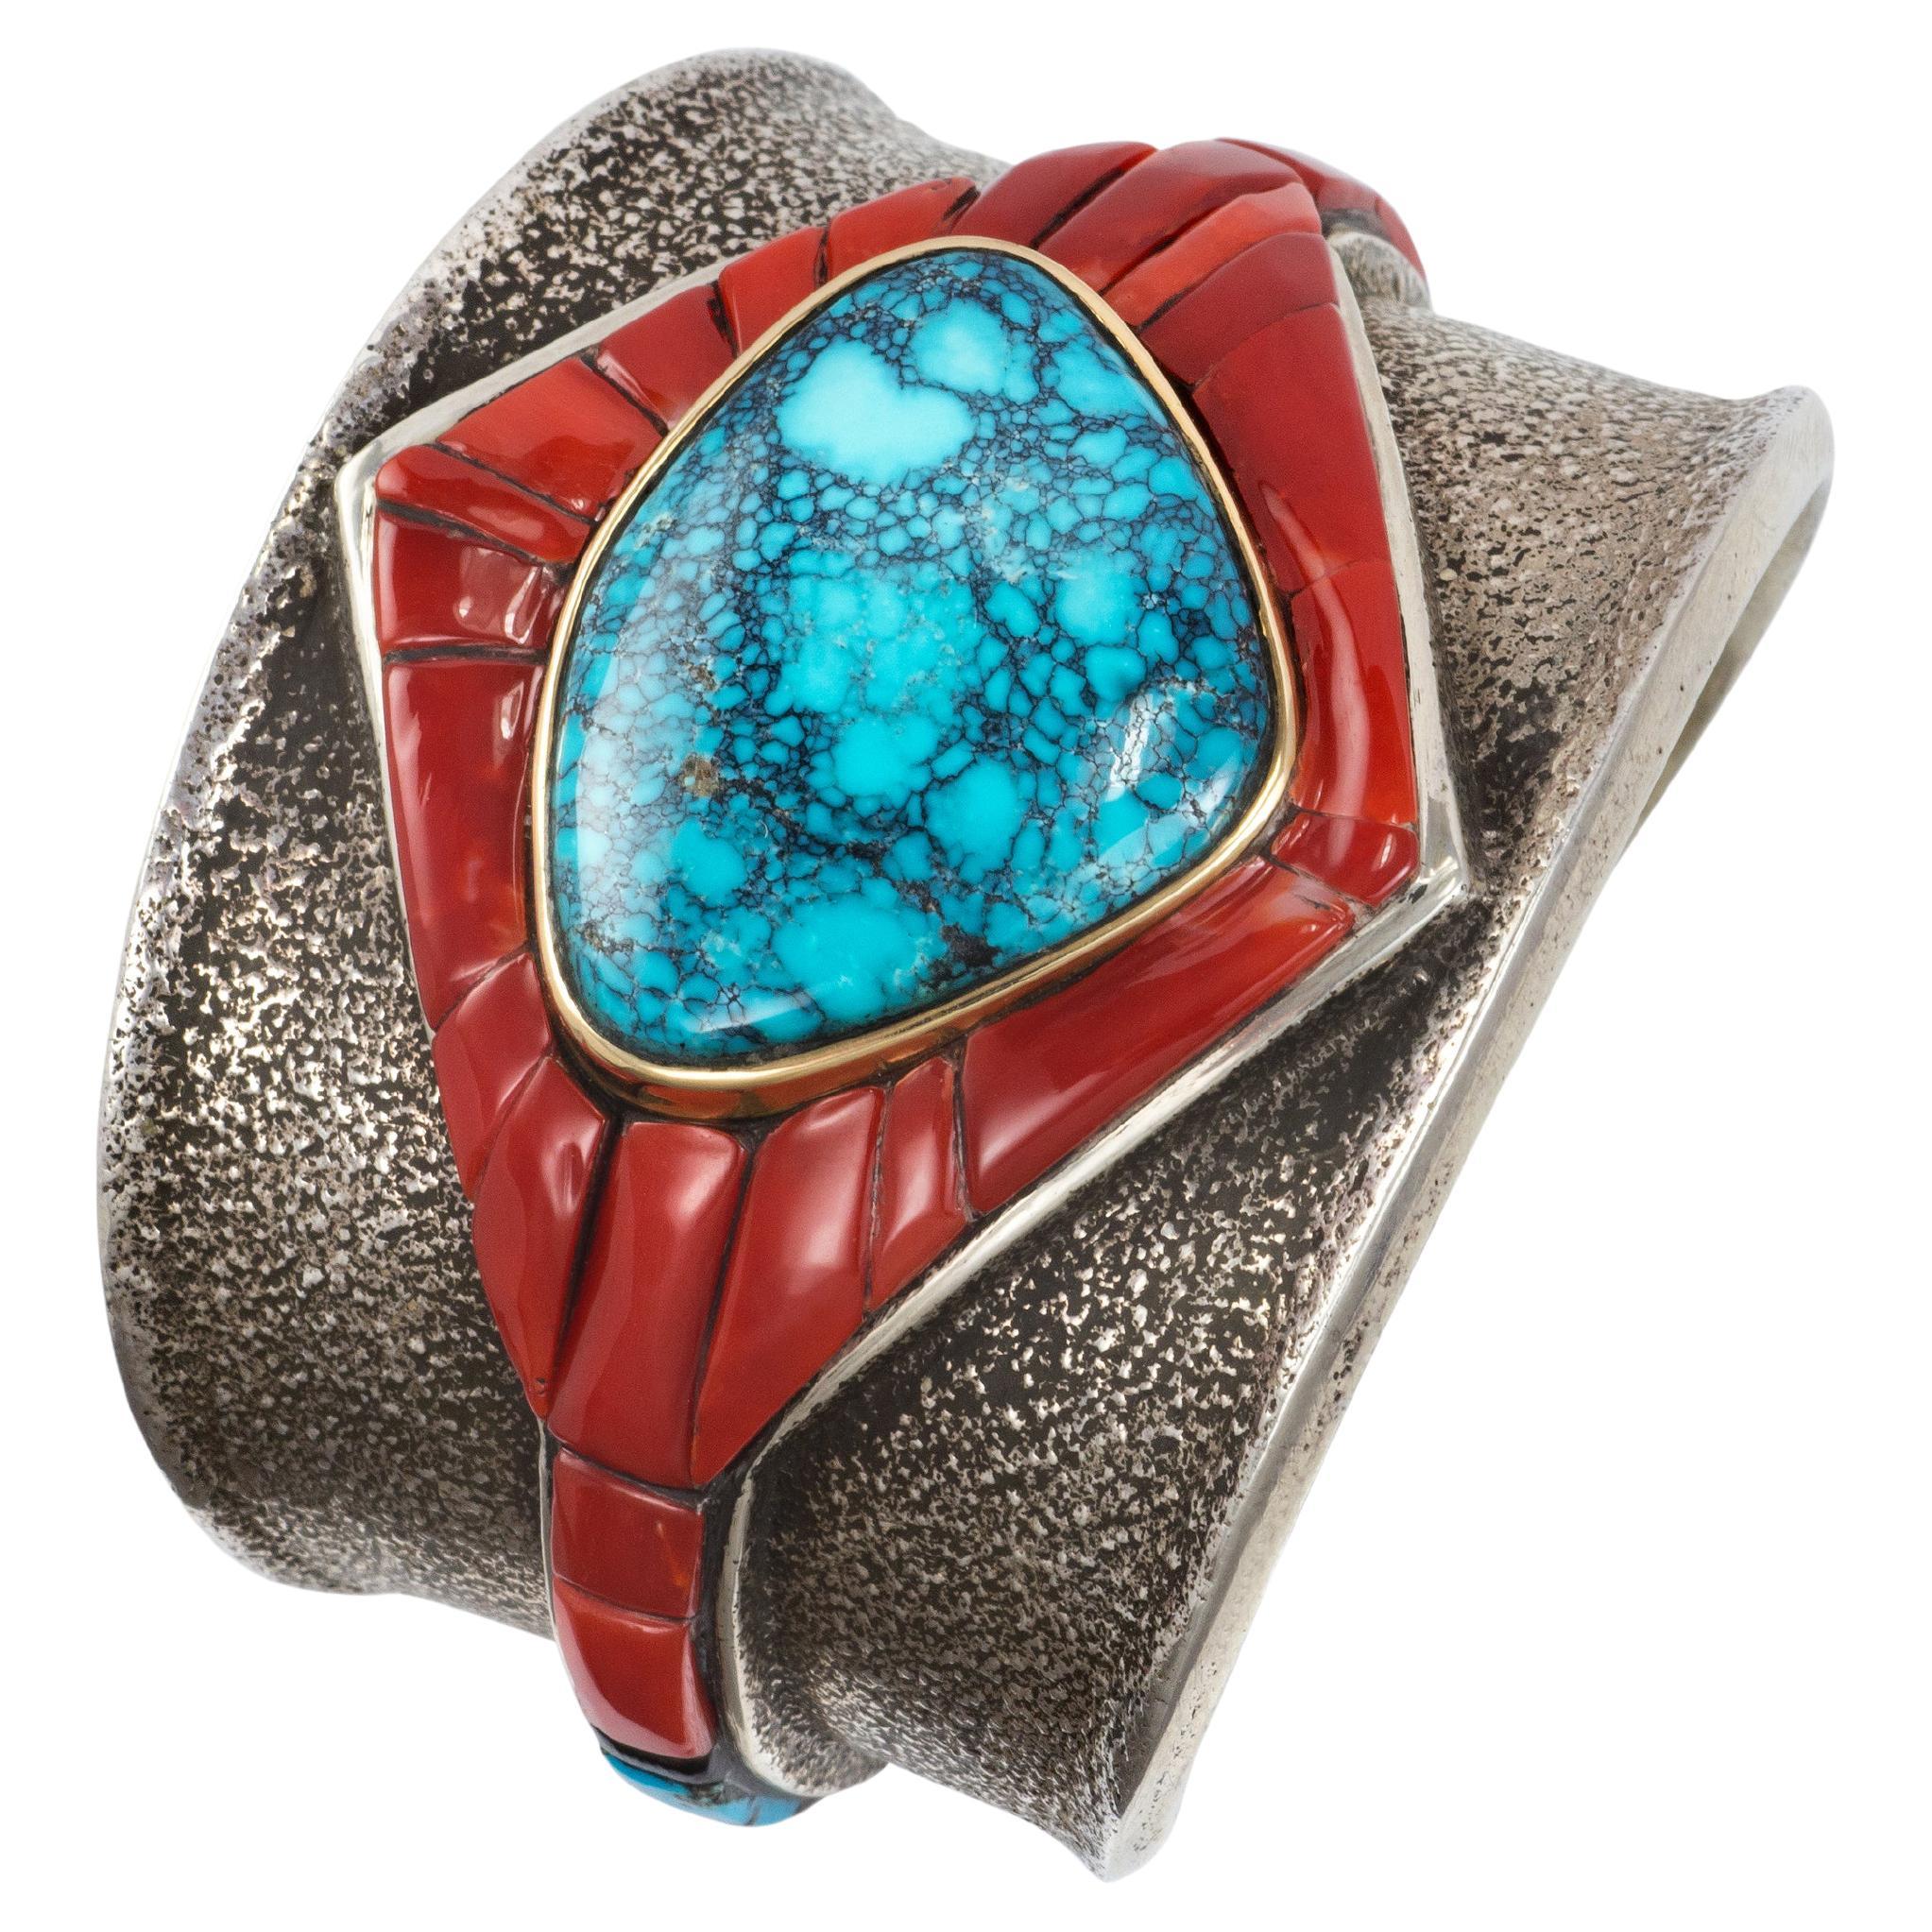 c. 2015 Edison Cummings Turquoise, Coral, Gold, and Sterling Silver Cuff